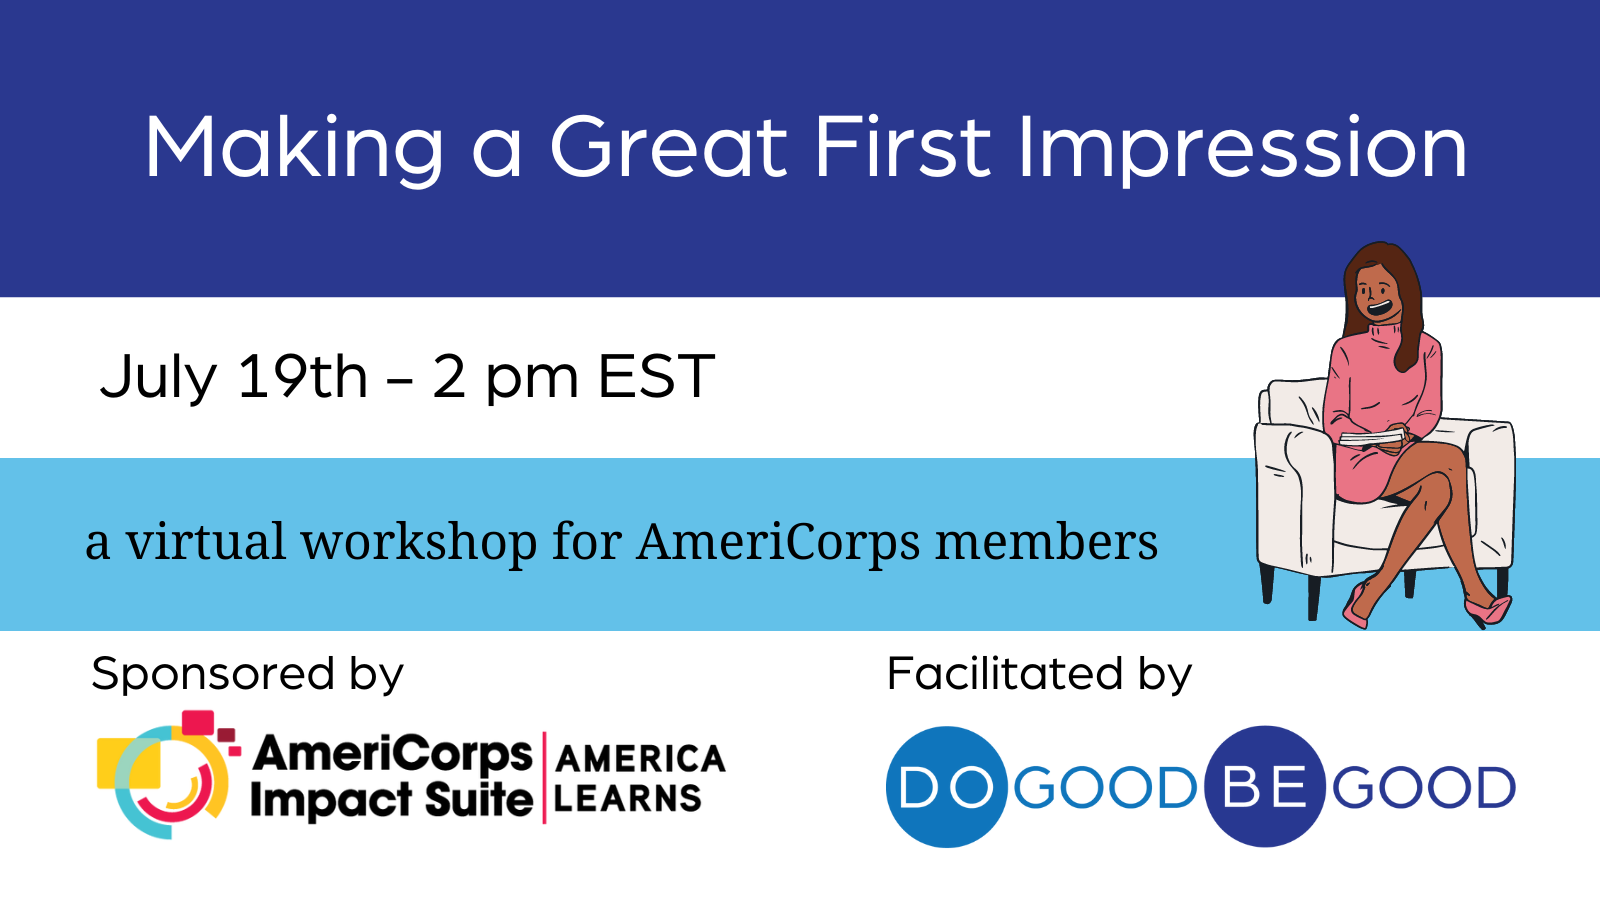 Making a Great First Impression, a virtual workshop for members on July 19th